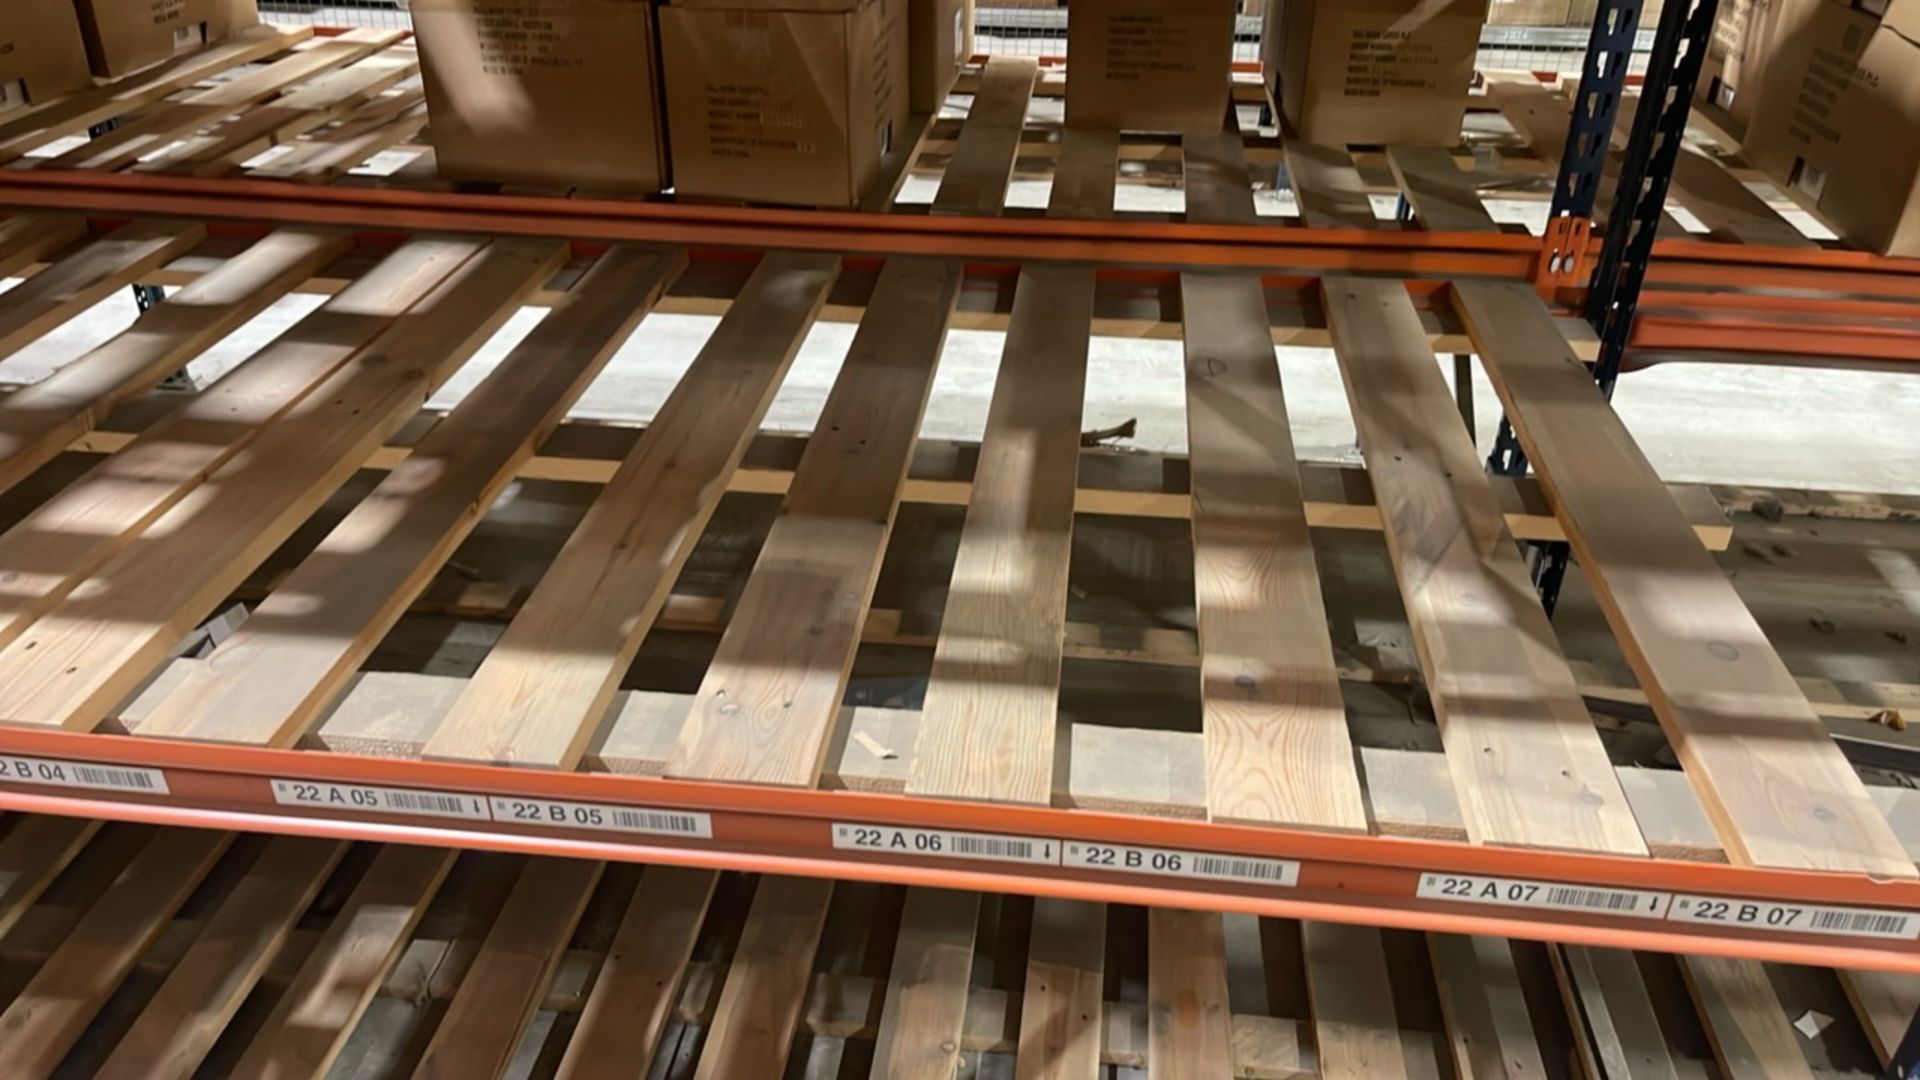 Run Of 24 Bays Of Back To Back Boltless Industrial Pallet Racking - Image 6 of 10